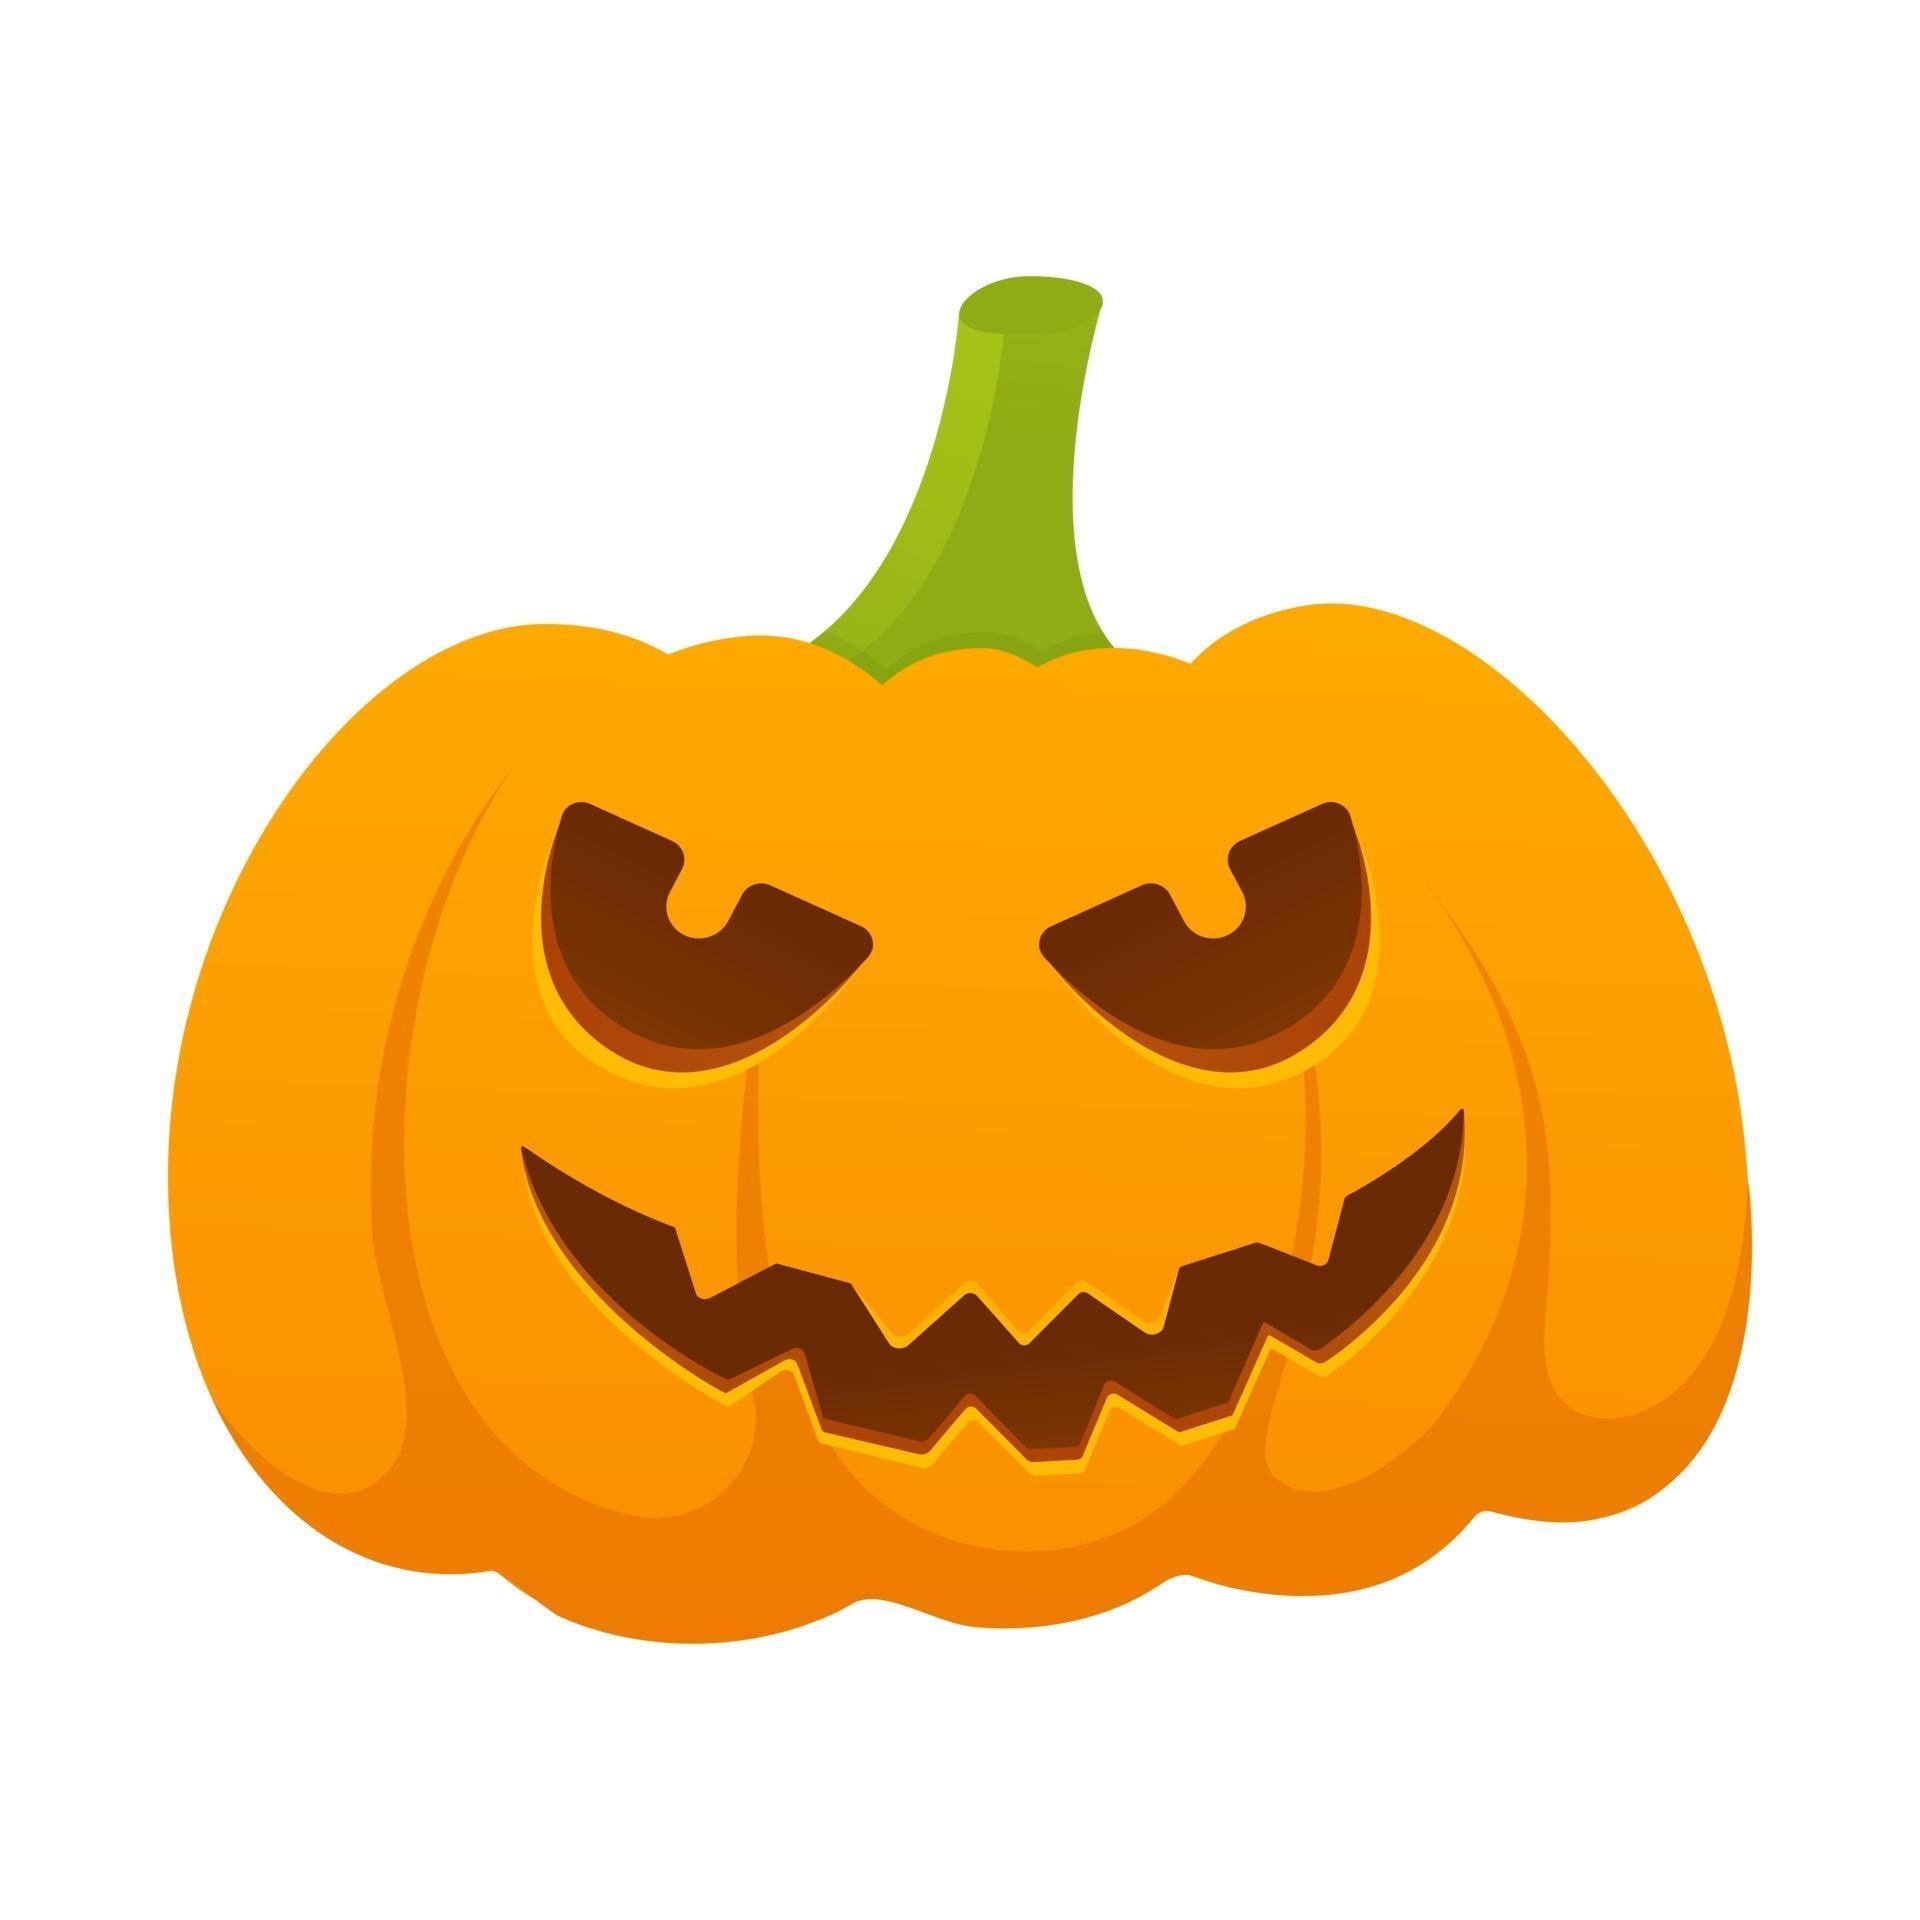 Orange halloween pumpkin with scary face expression grimace flat style ...